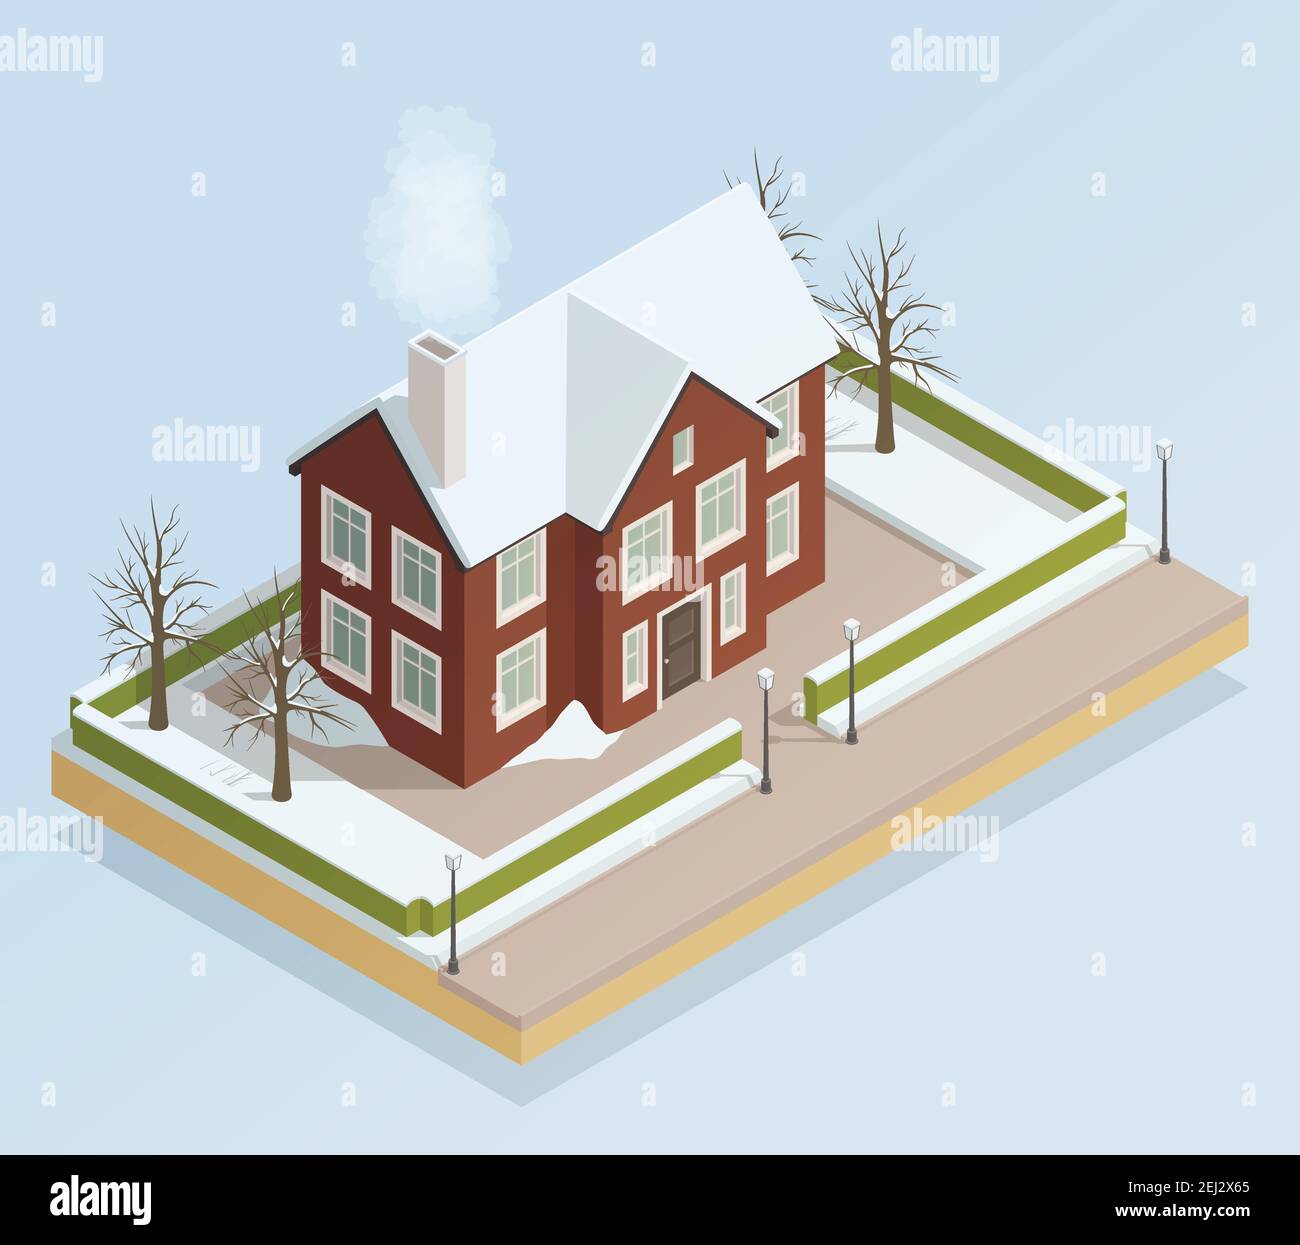 Freezy winter landscape with free standing town house with some land isometric elements composition vector illustration Stock Vector